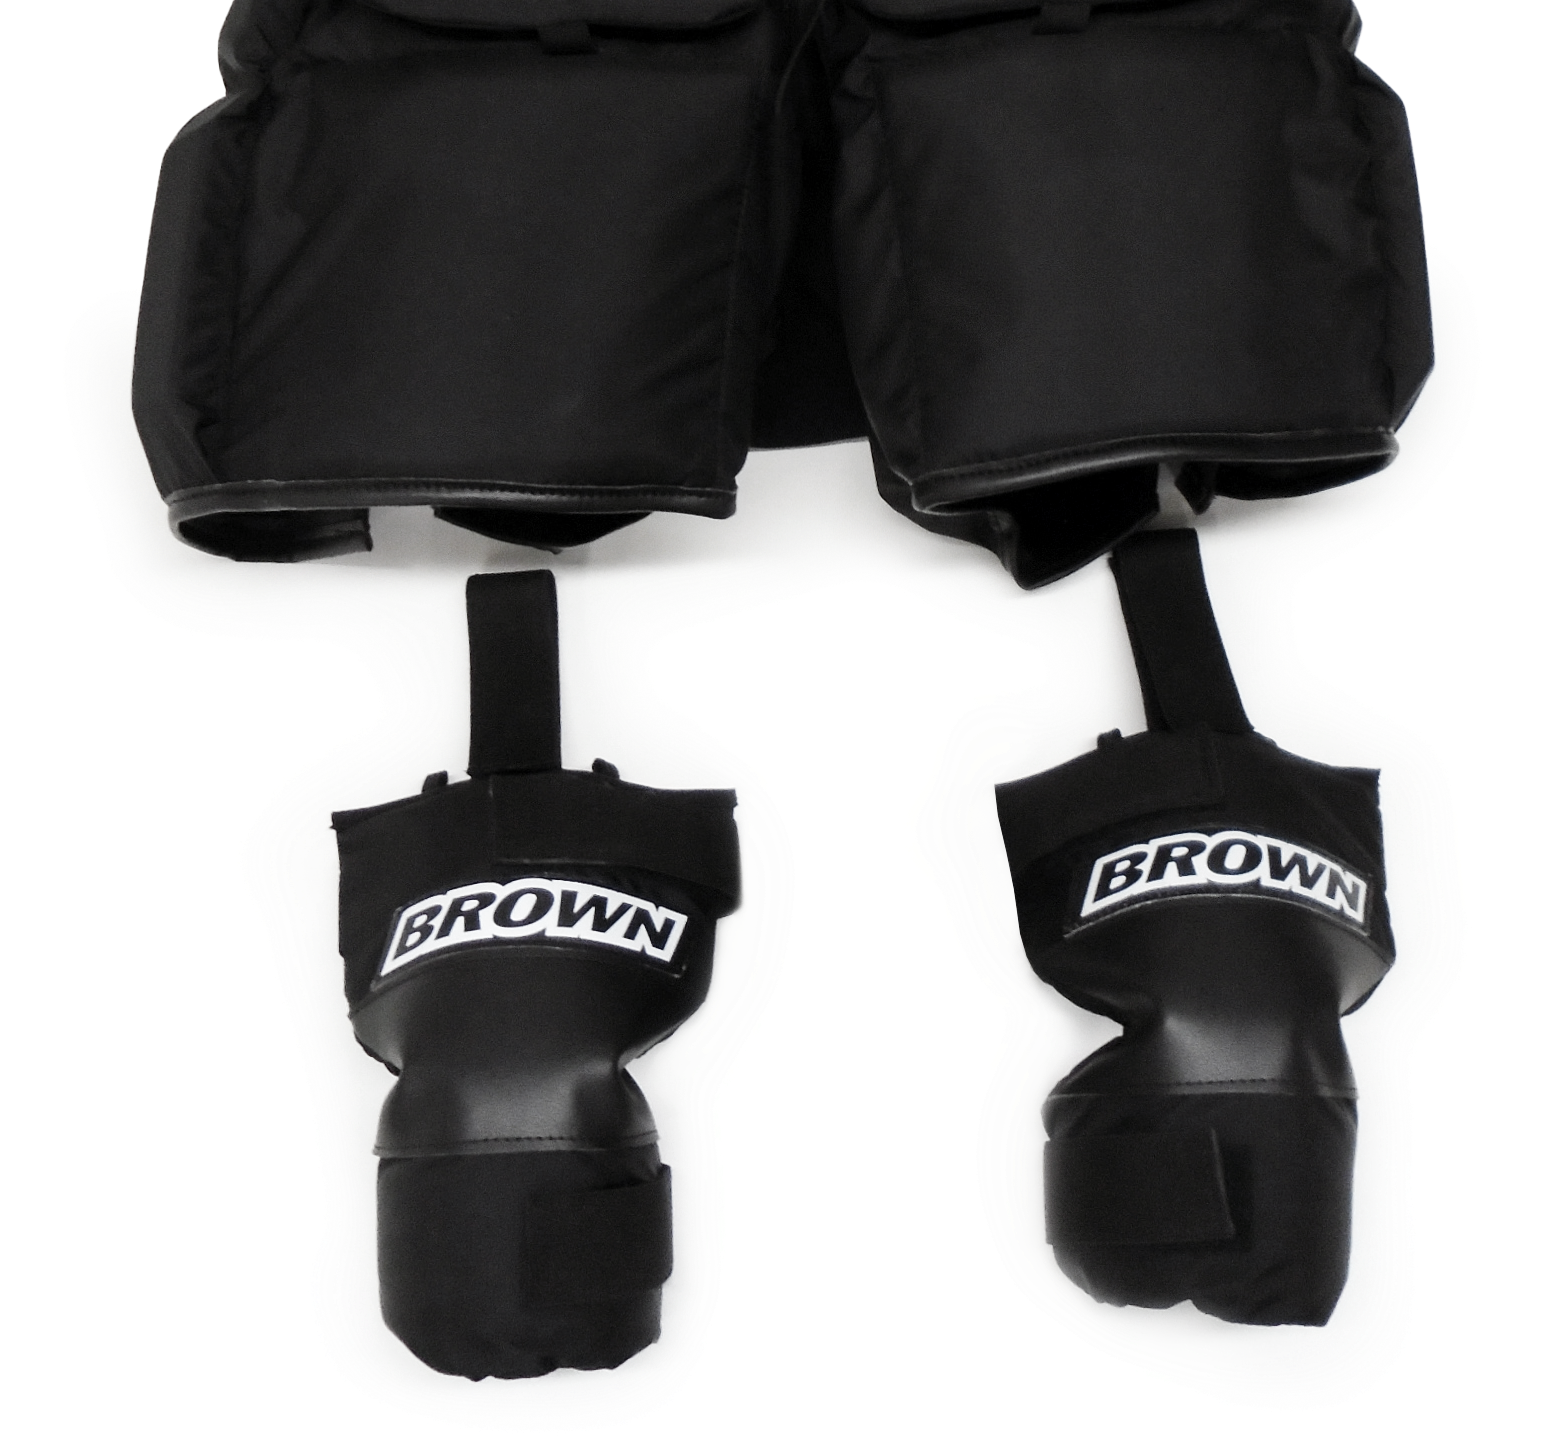 Knee Pads attached to Pants